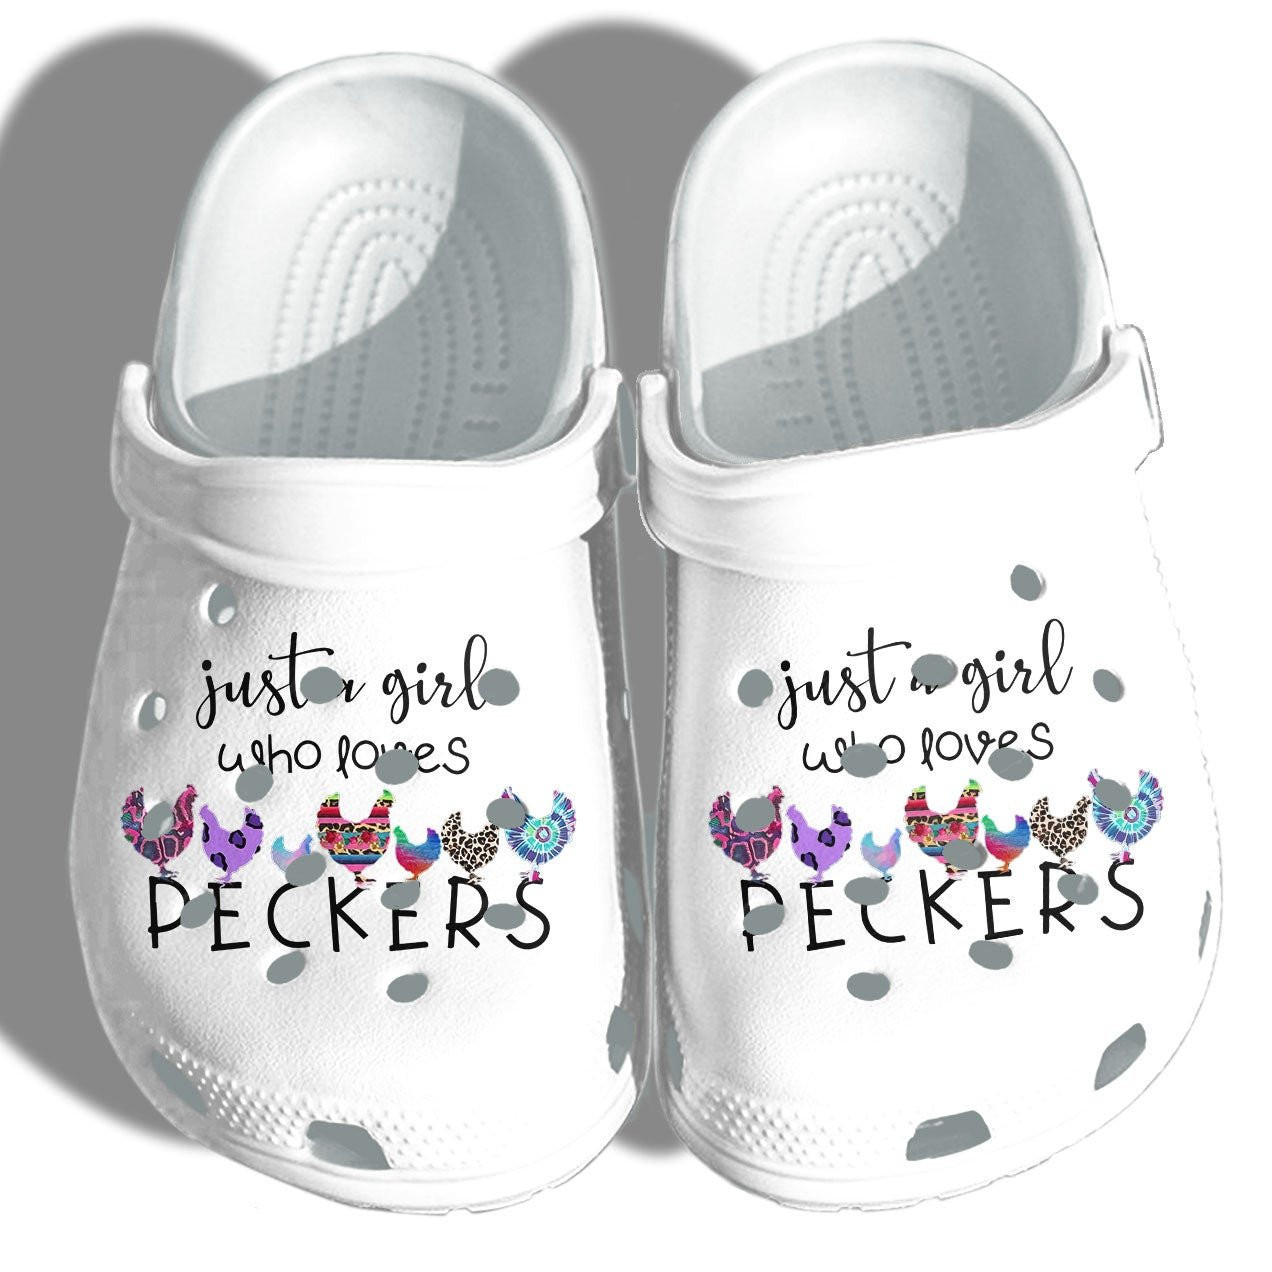 Just A Girl Who Loves Peckers Chicken Crocs Shoes Clogs Clog Farm Life